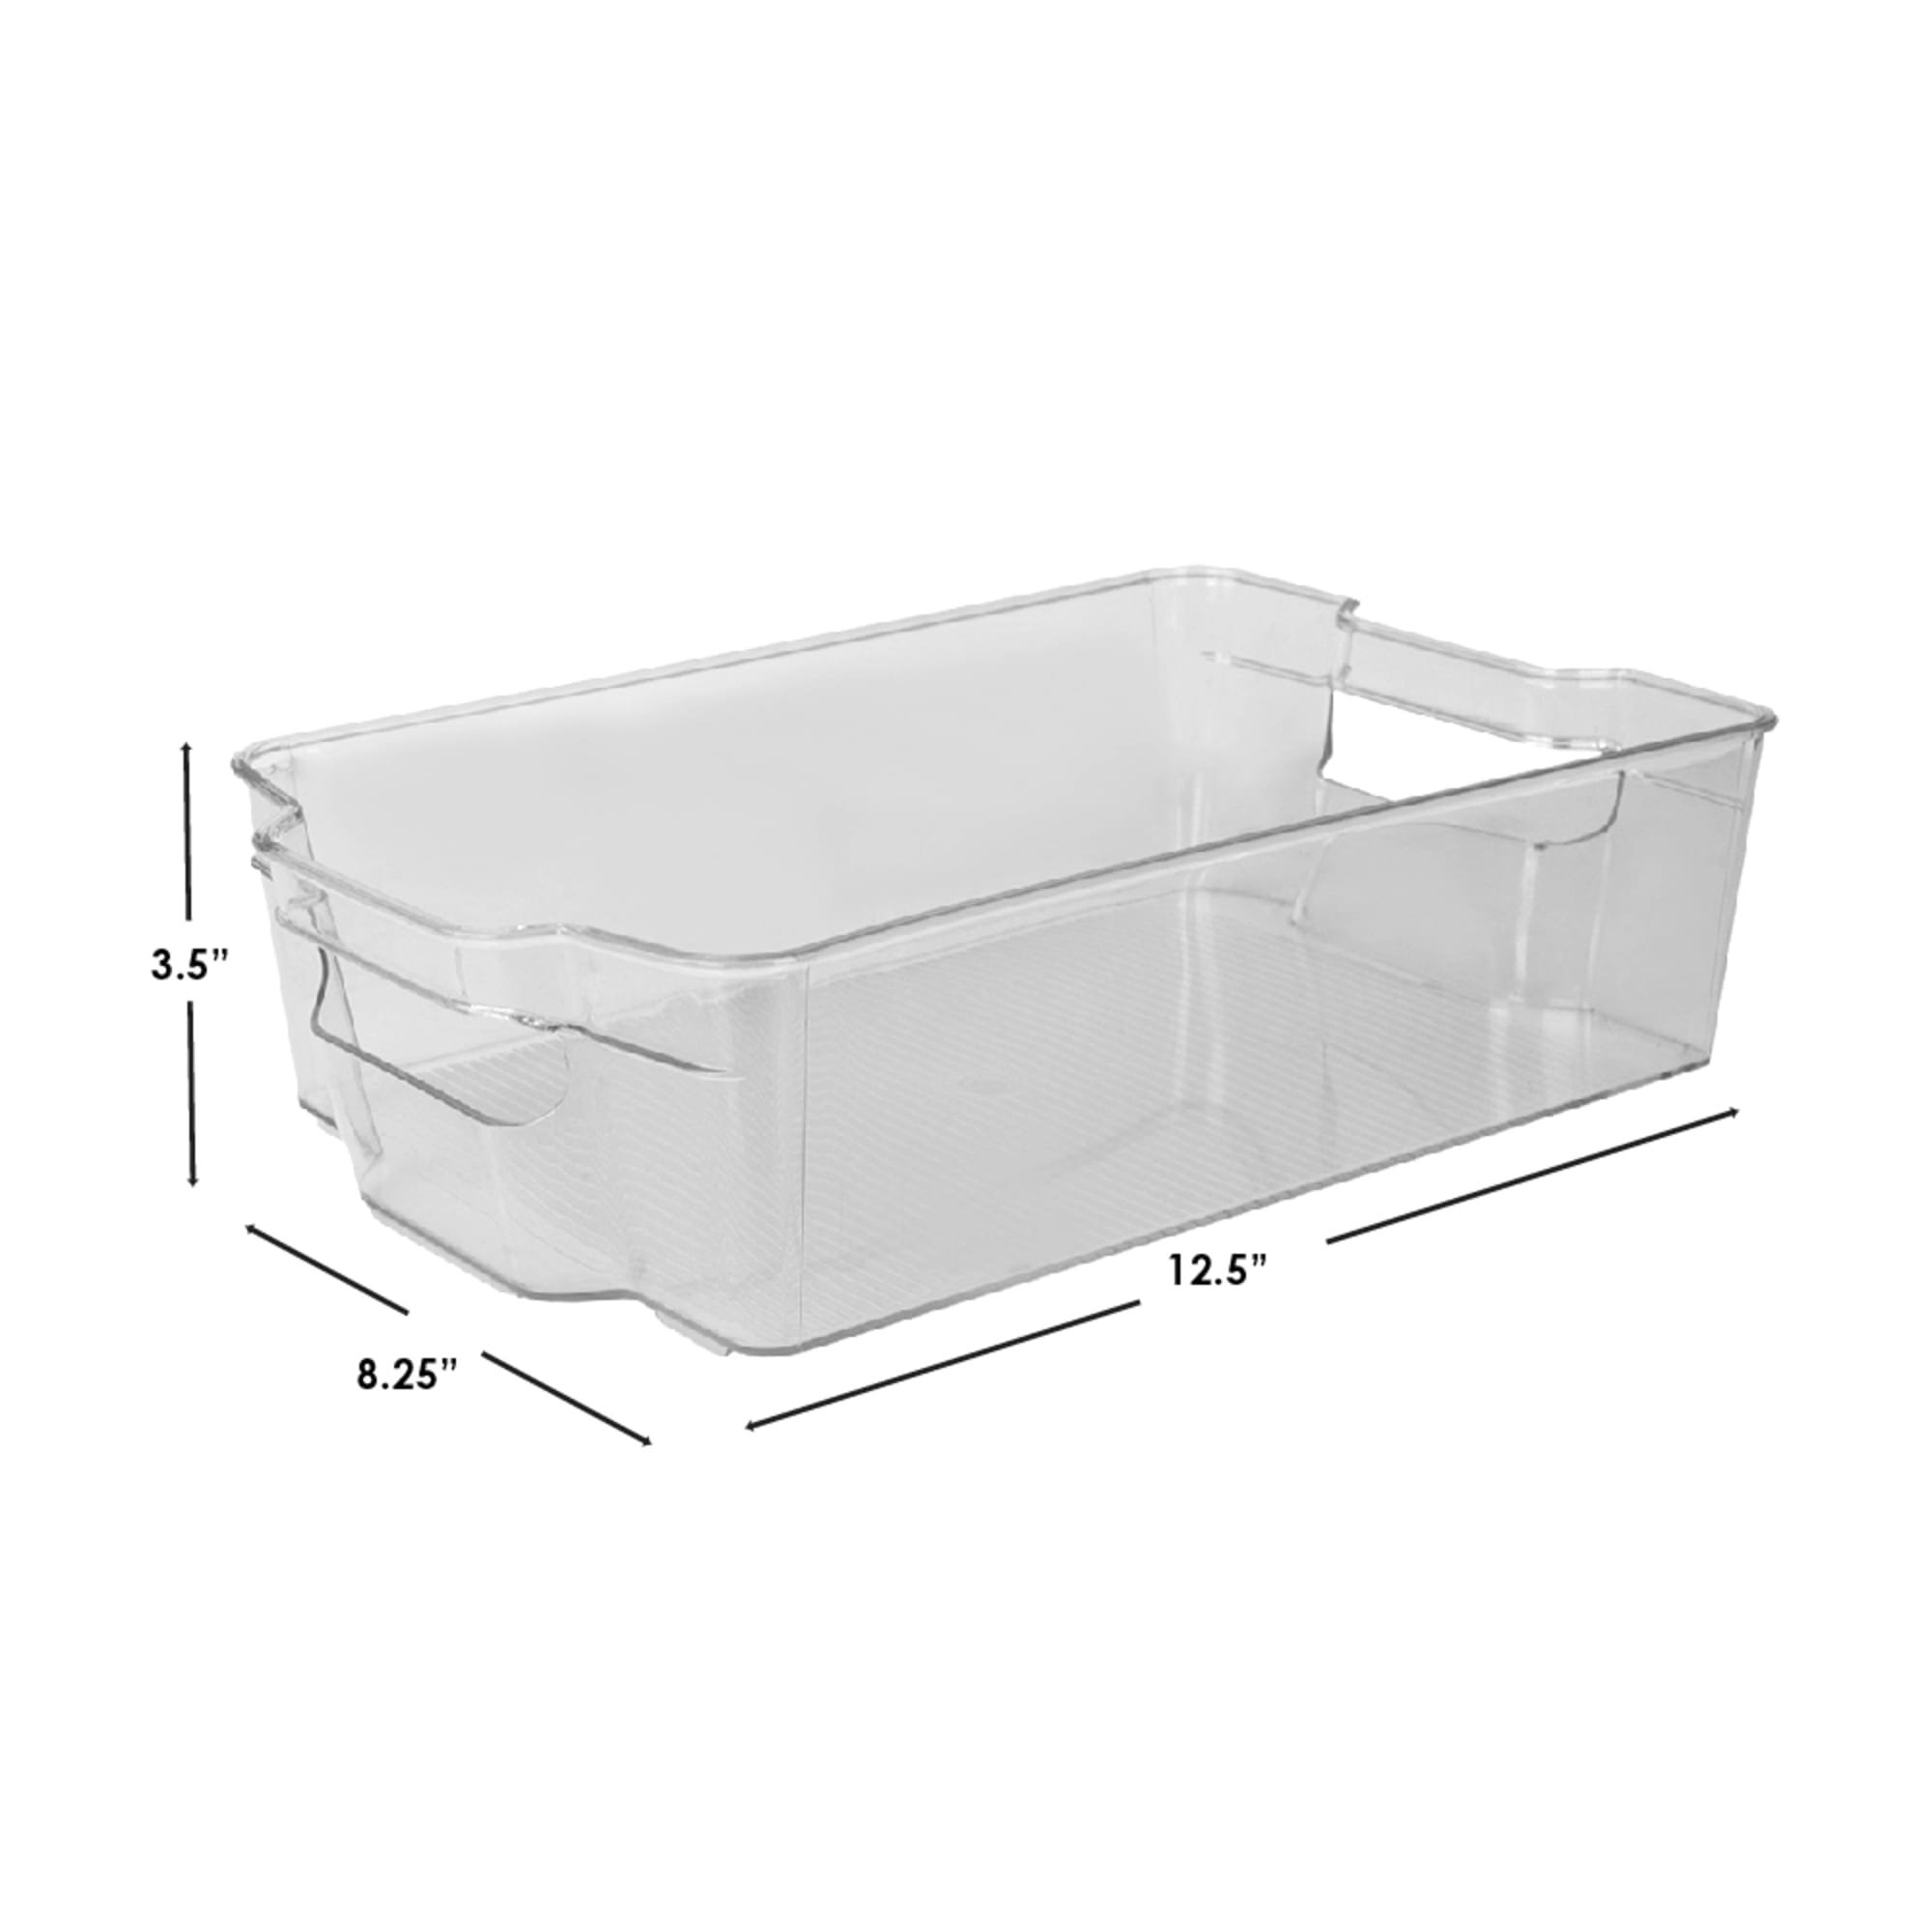 Home Basics Stackable Large Plastic Fridge Pantry and Closet Organization Bin with Handles $4.00 EACH, CASE PACK OF 12